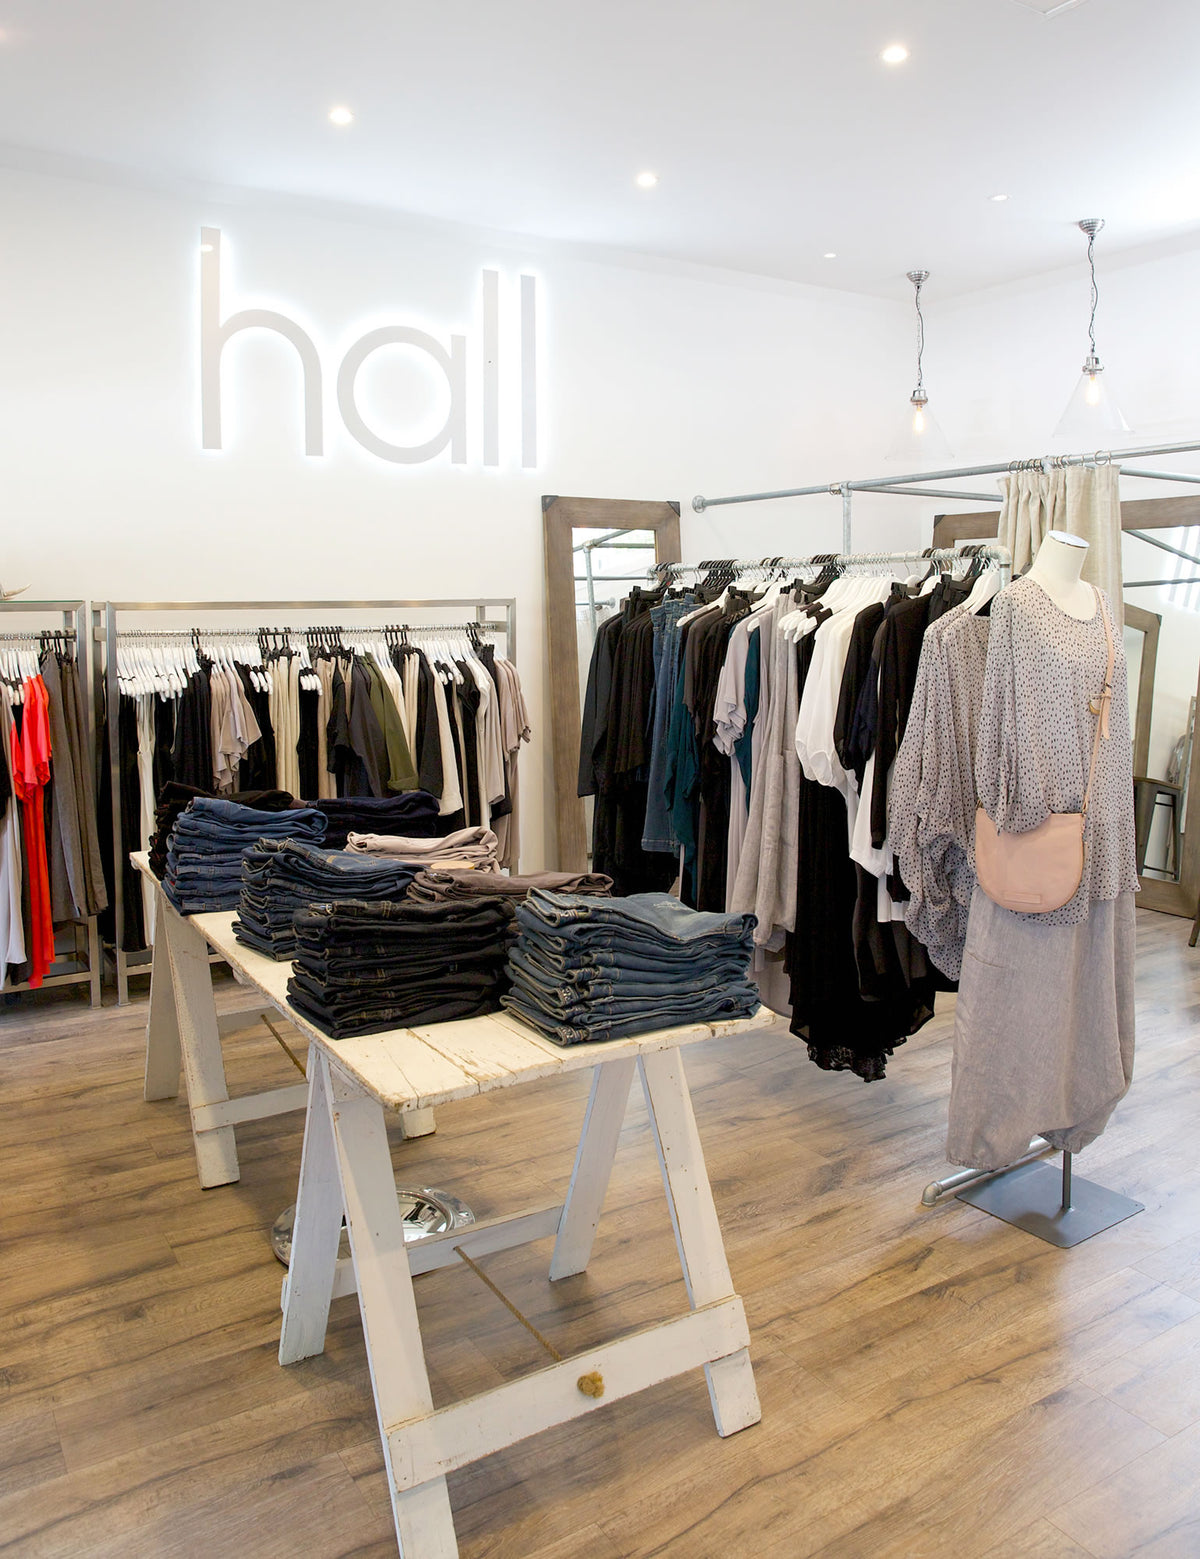 Hall Flagship store renovations are complete!